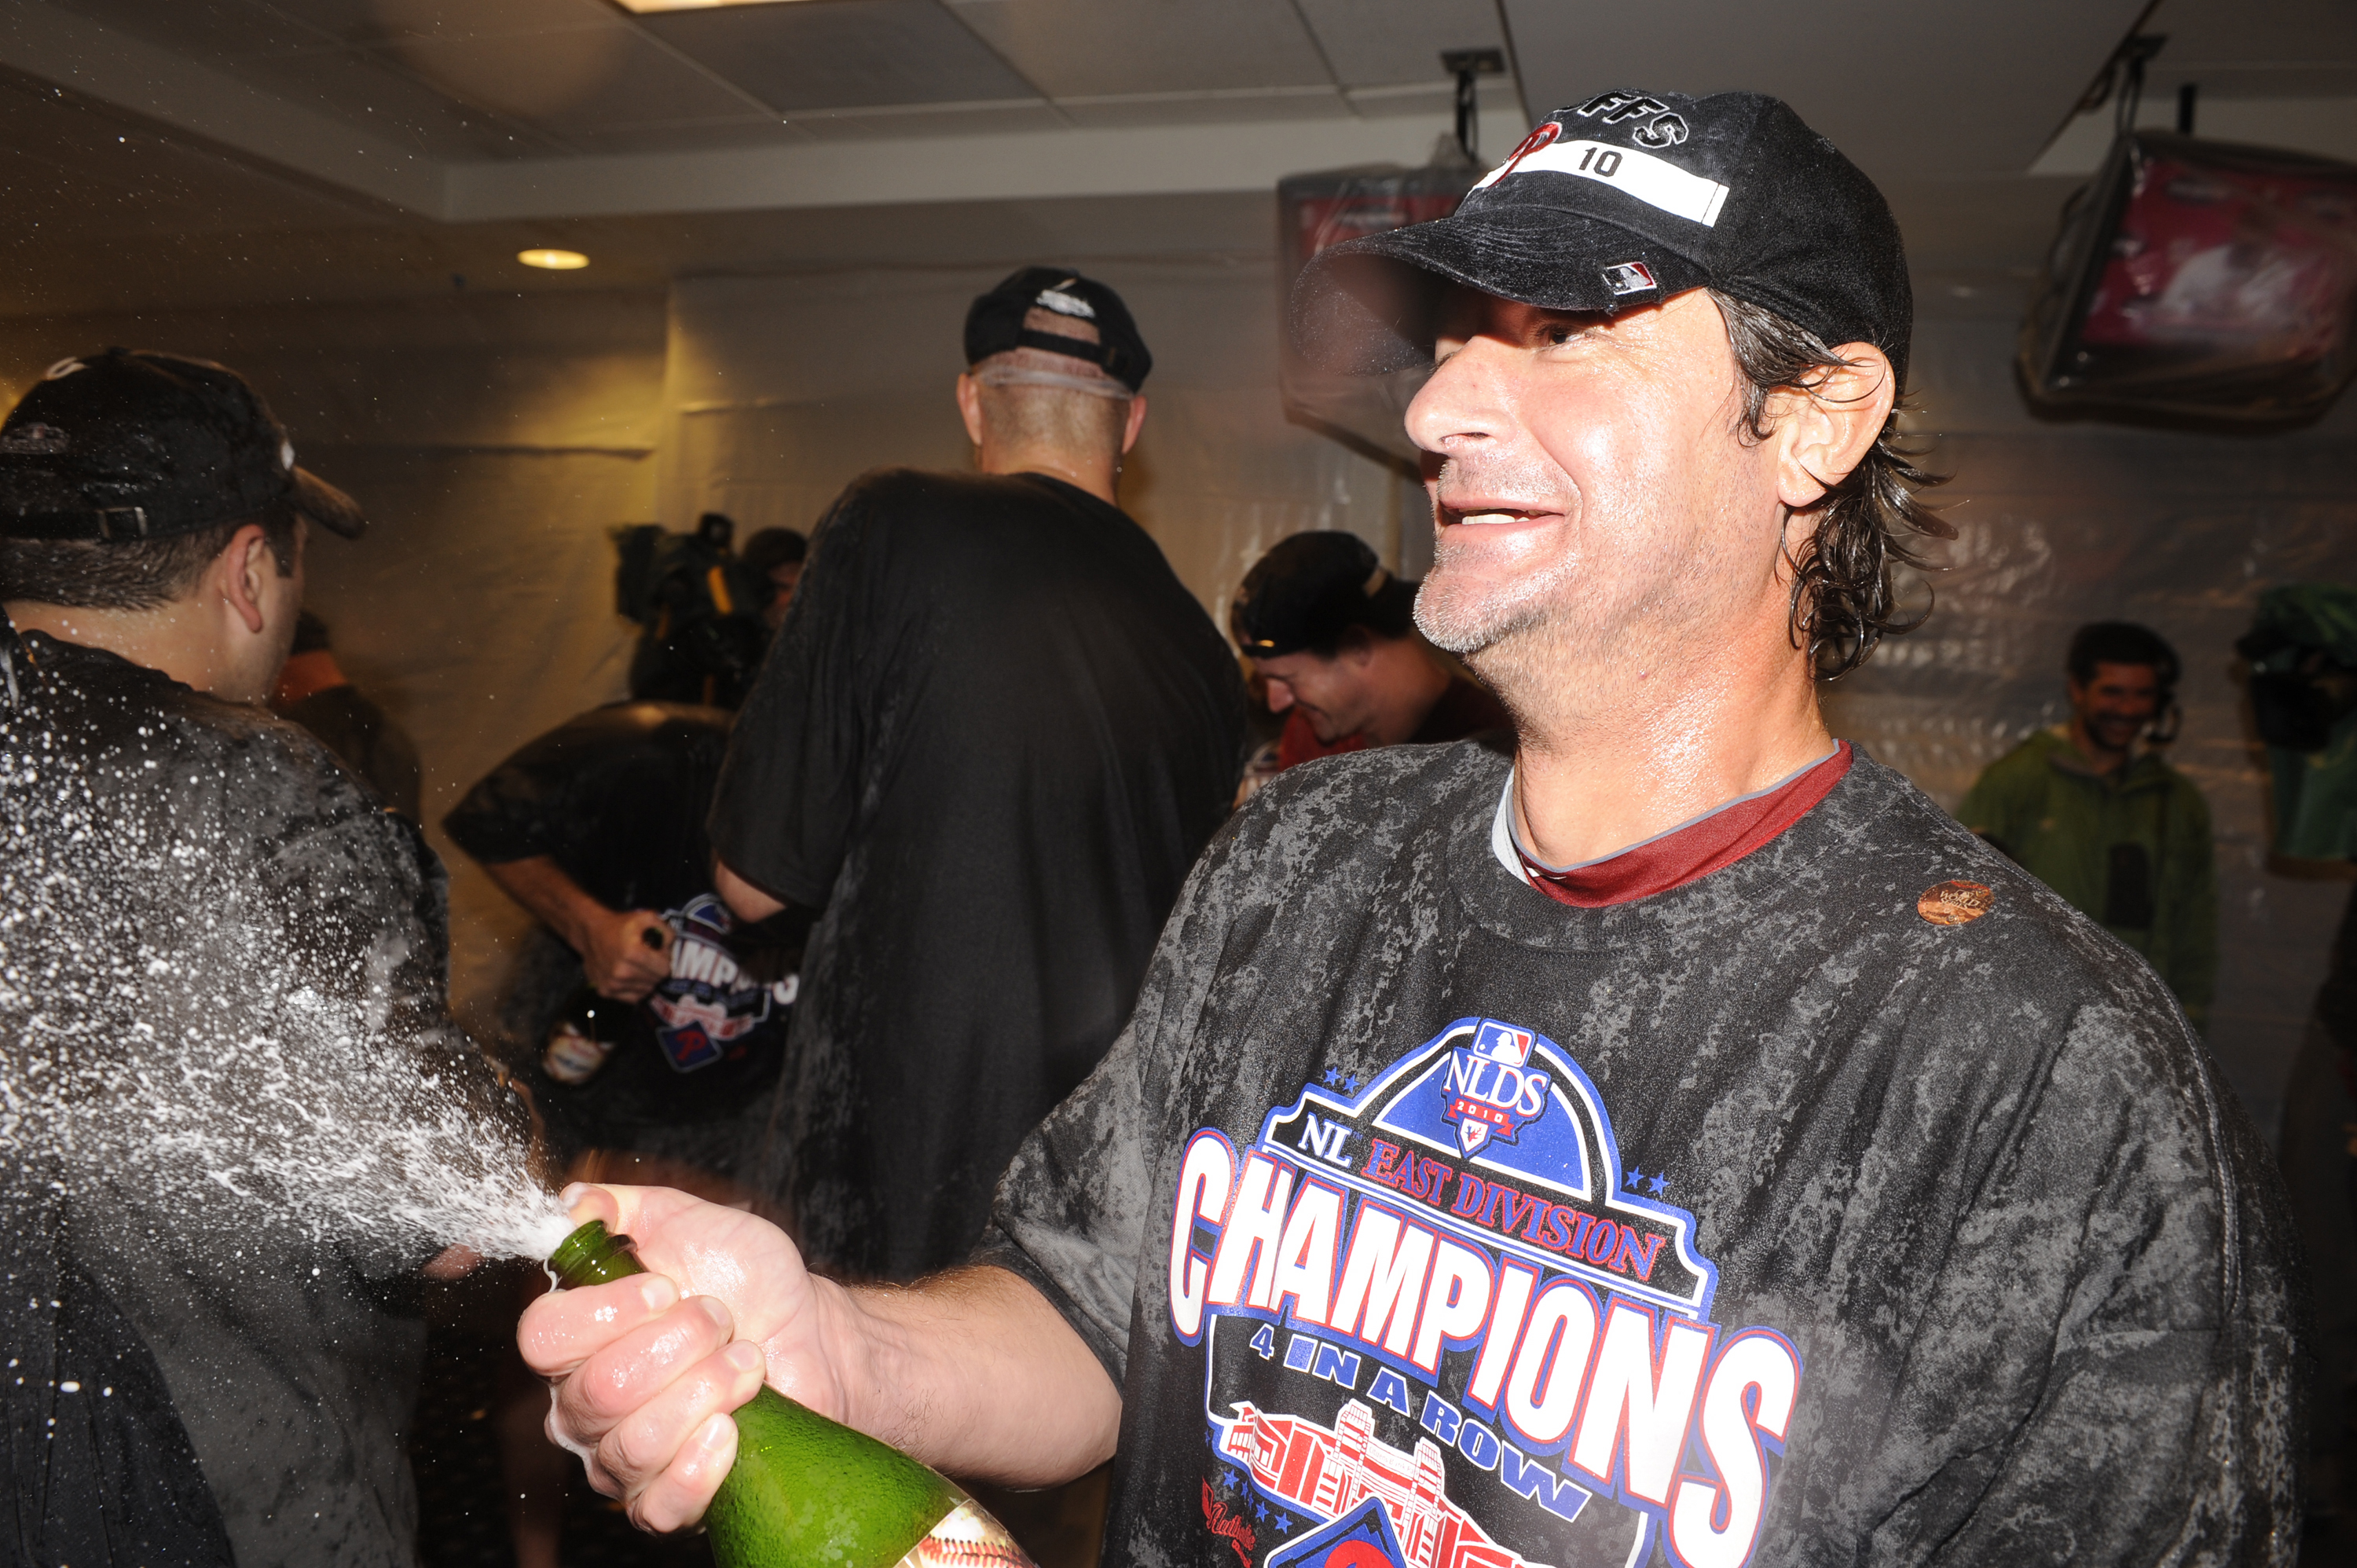 WASHINGTON - SEPTEMBER 27:  Jamie Moyer of the Philadelphia Phillies celebrates clinching the National League EasT title after a baseball game against the Washington Nationals on September 27, 2010 at Nationals Park in Washington, D.C.  The Phillies won 8